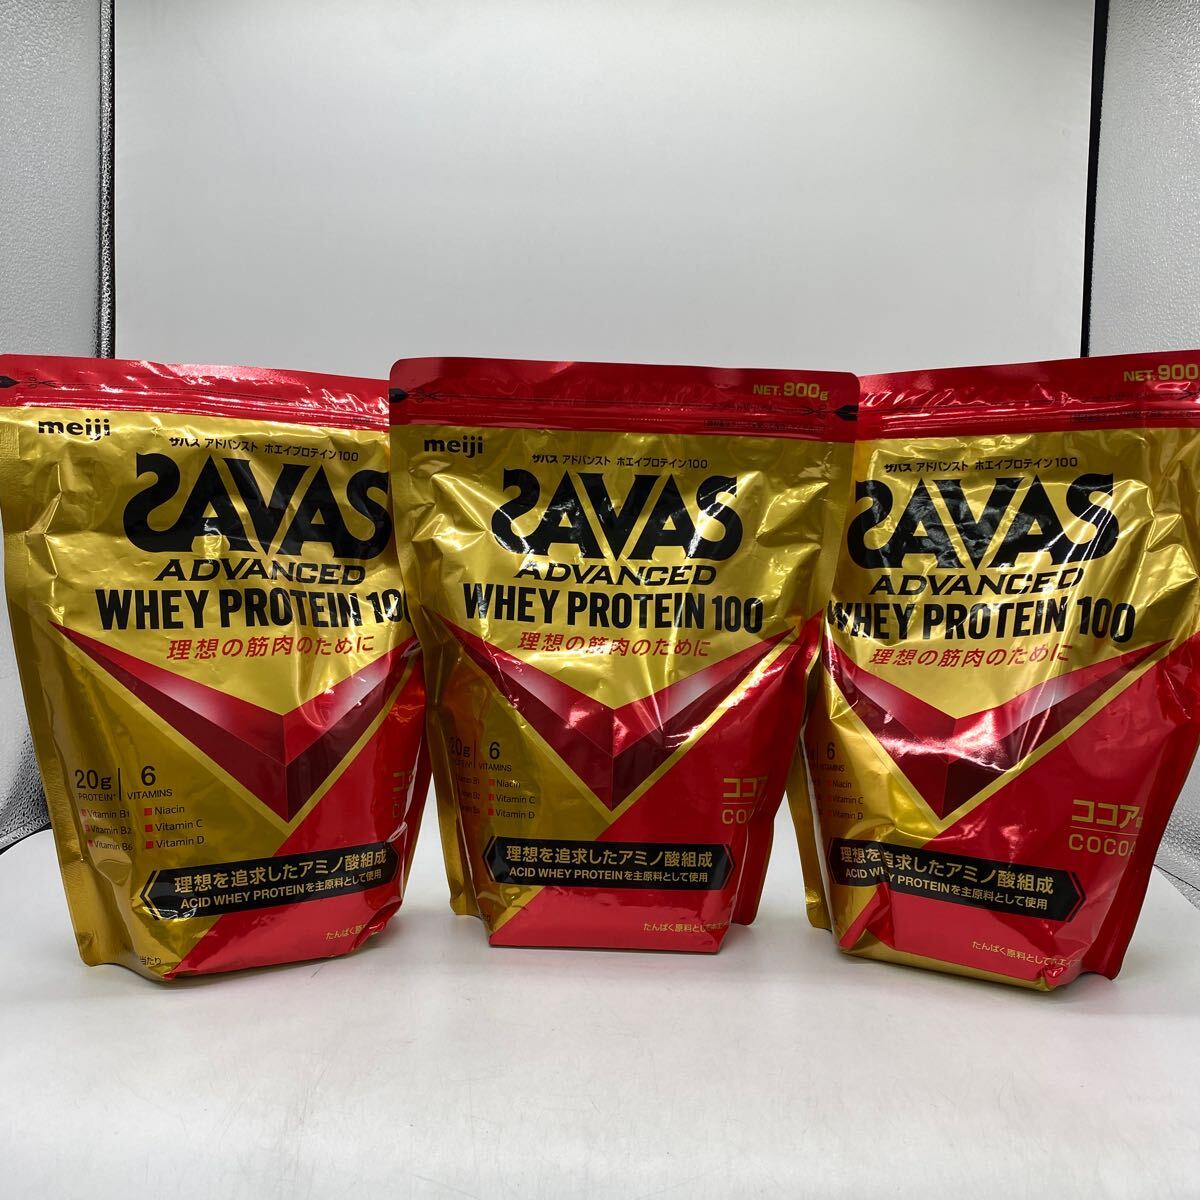 A0958 unopened health food The bus advanced whey protein 900g × 3 sack cocoa taste SAVAS ADVANCED WHEY PROTEIN